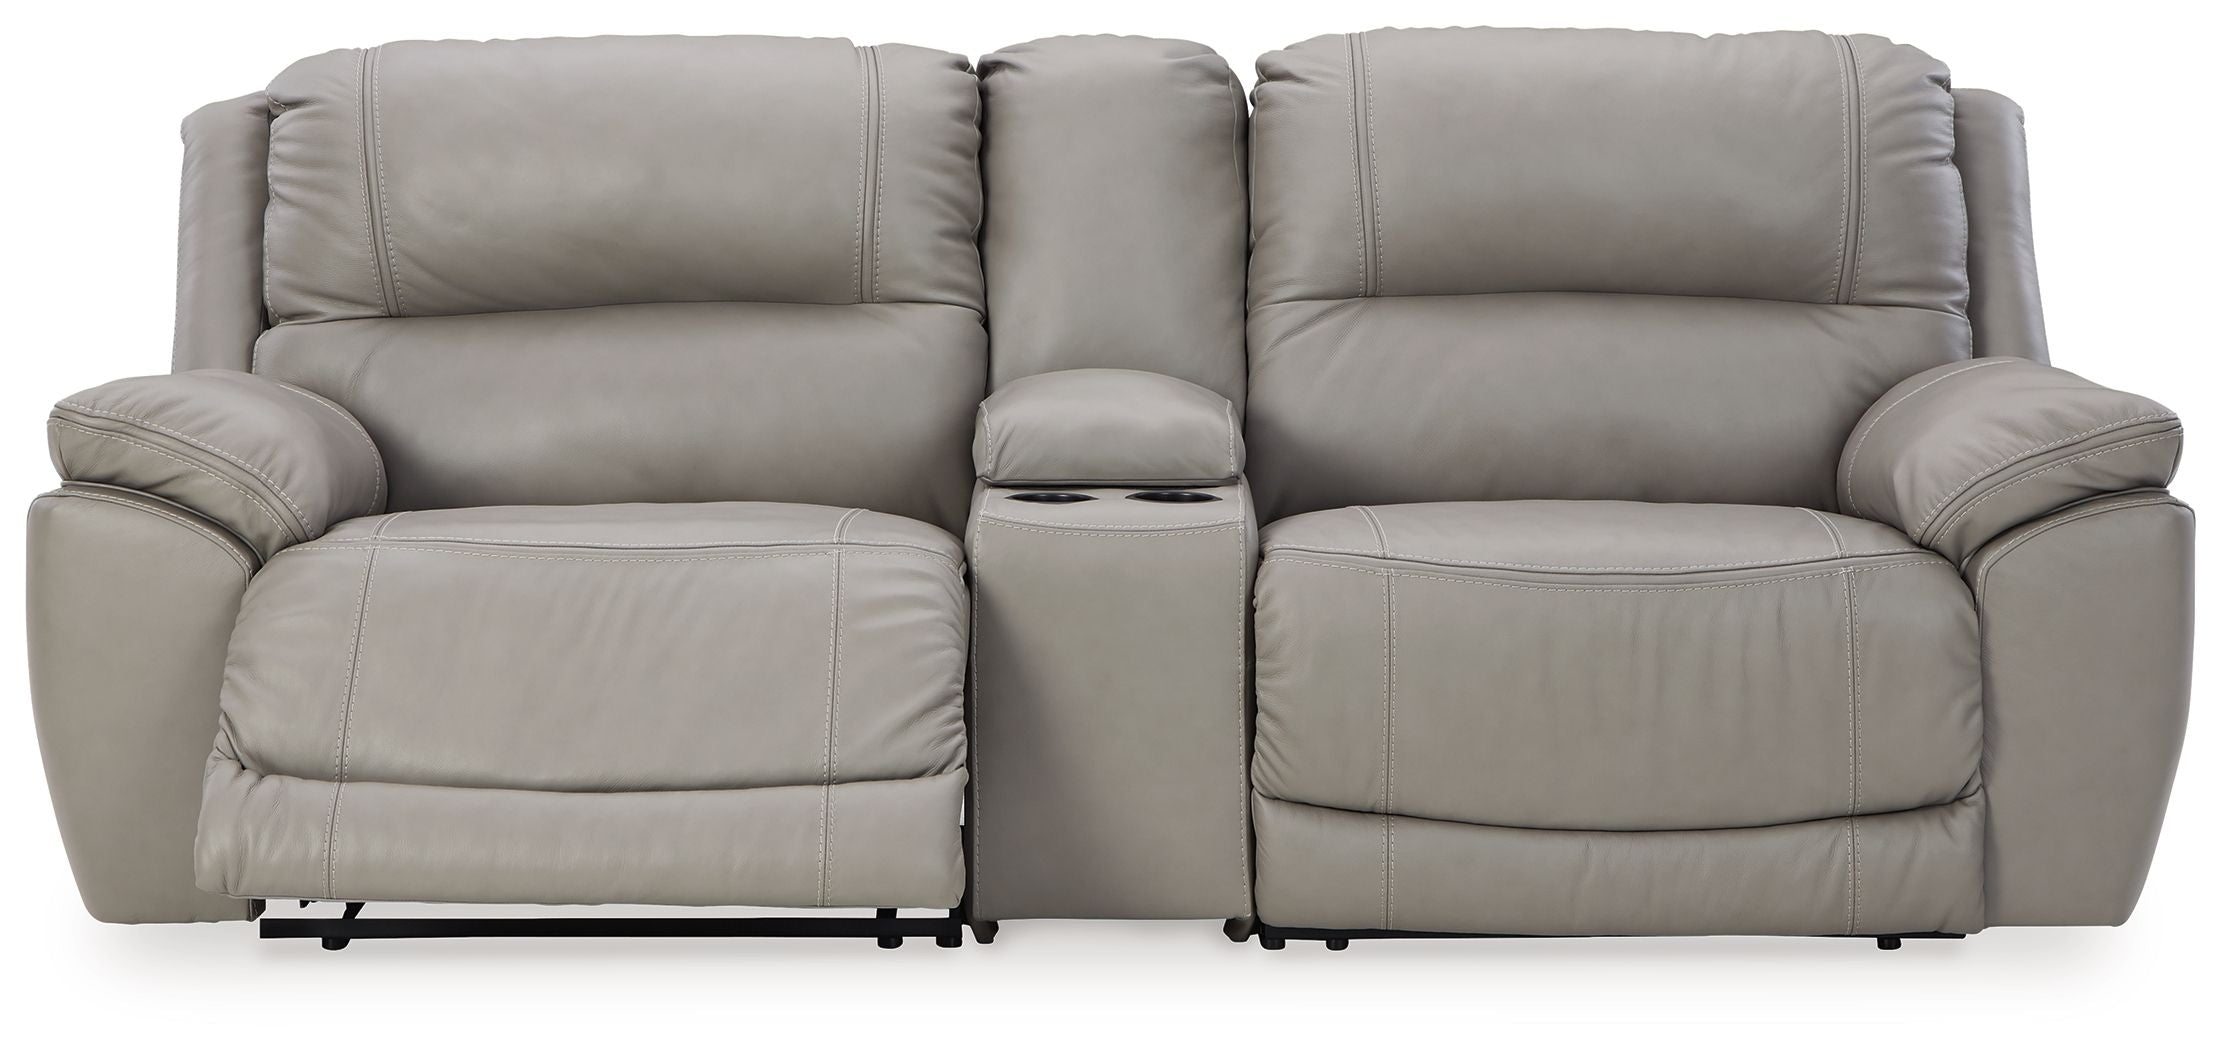 Dunleith Leather Power Reclining Sectional